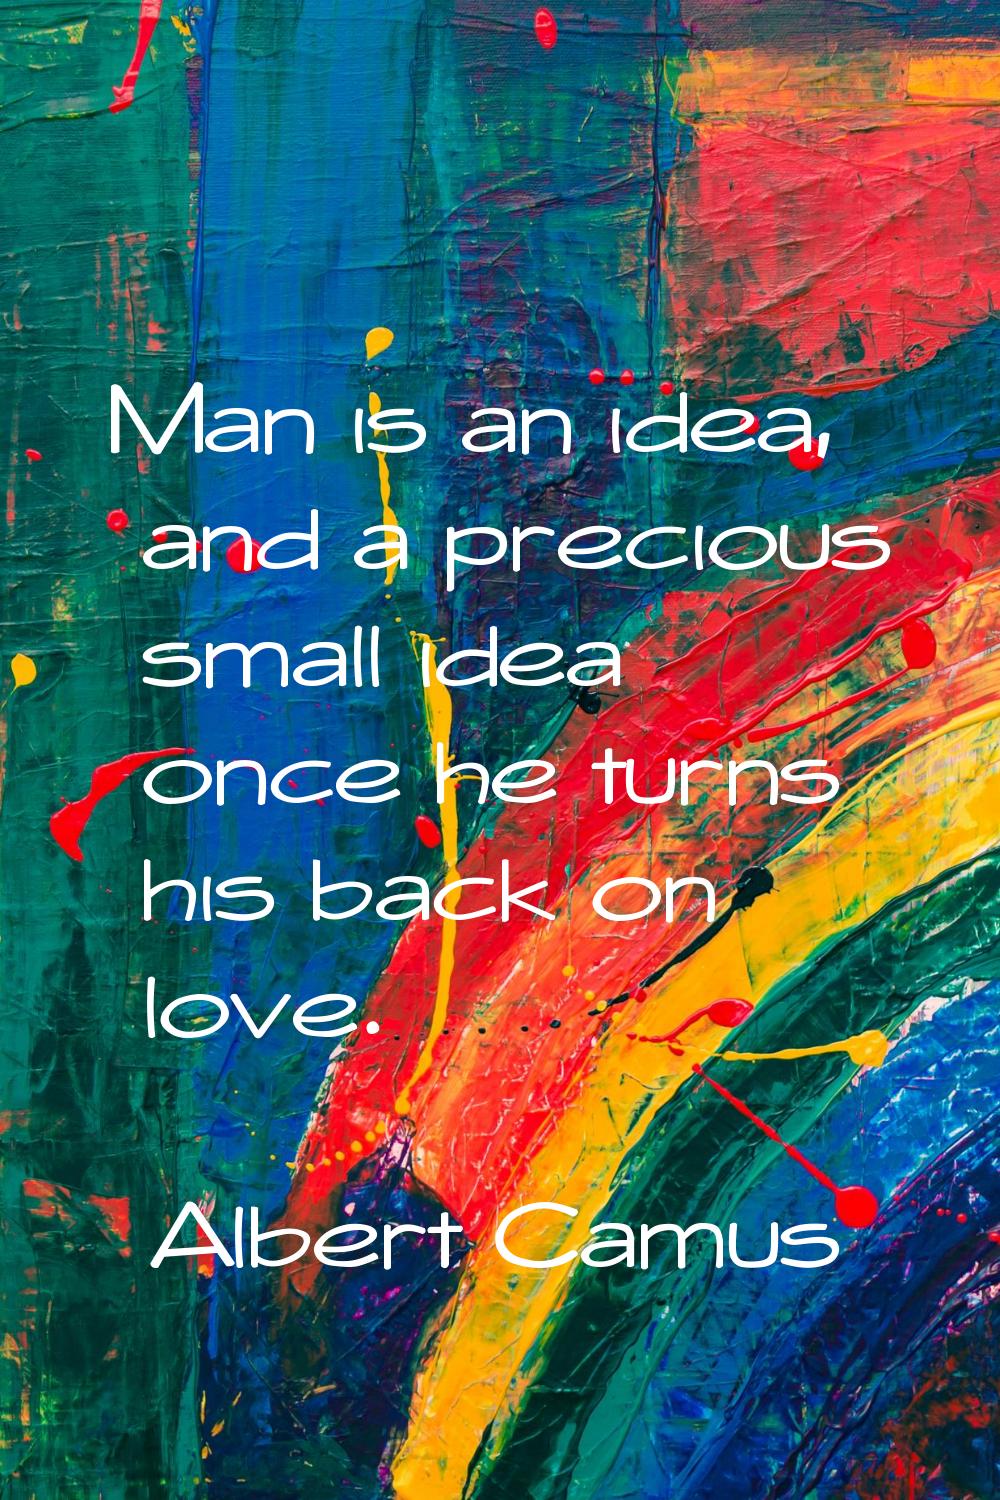 Man is an idea, and a precious small idea once he turns his back on love.